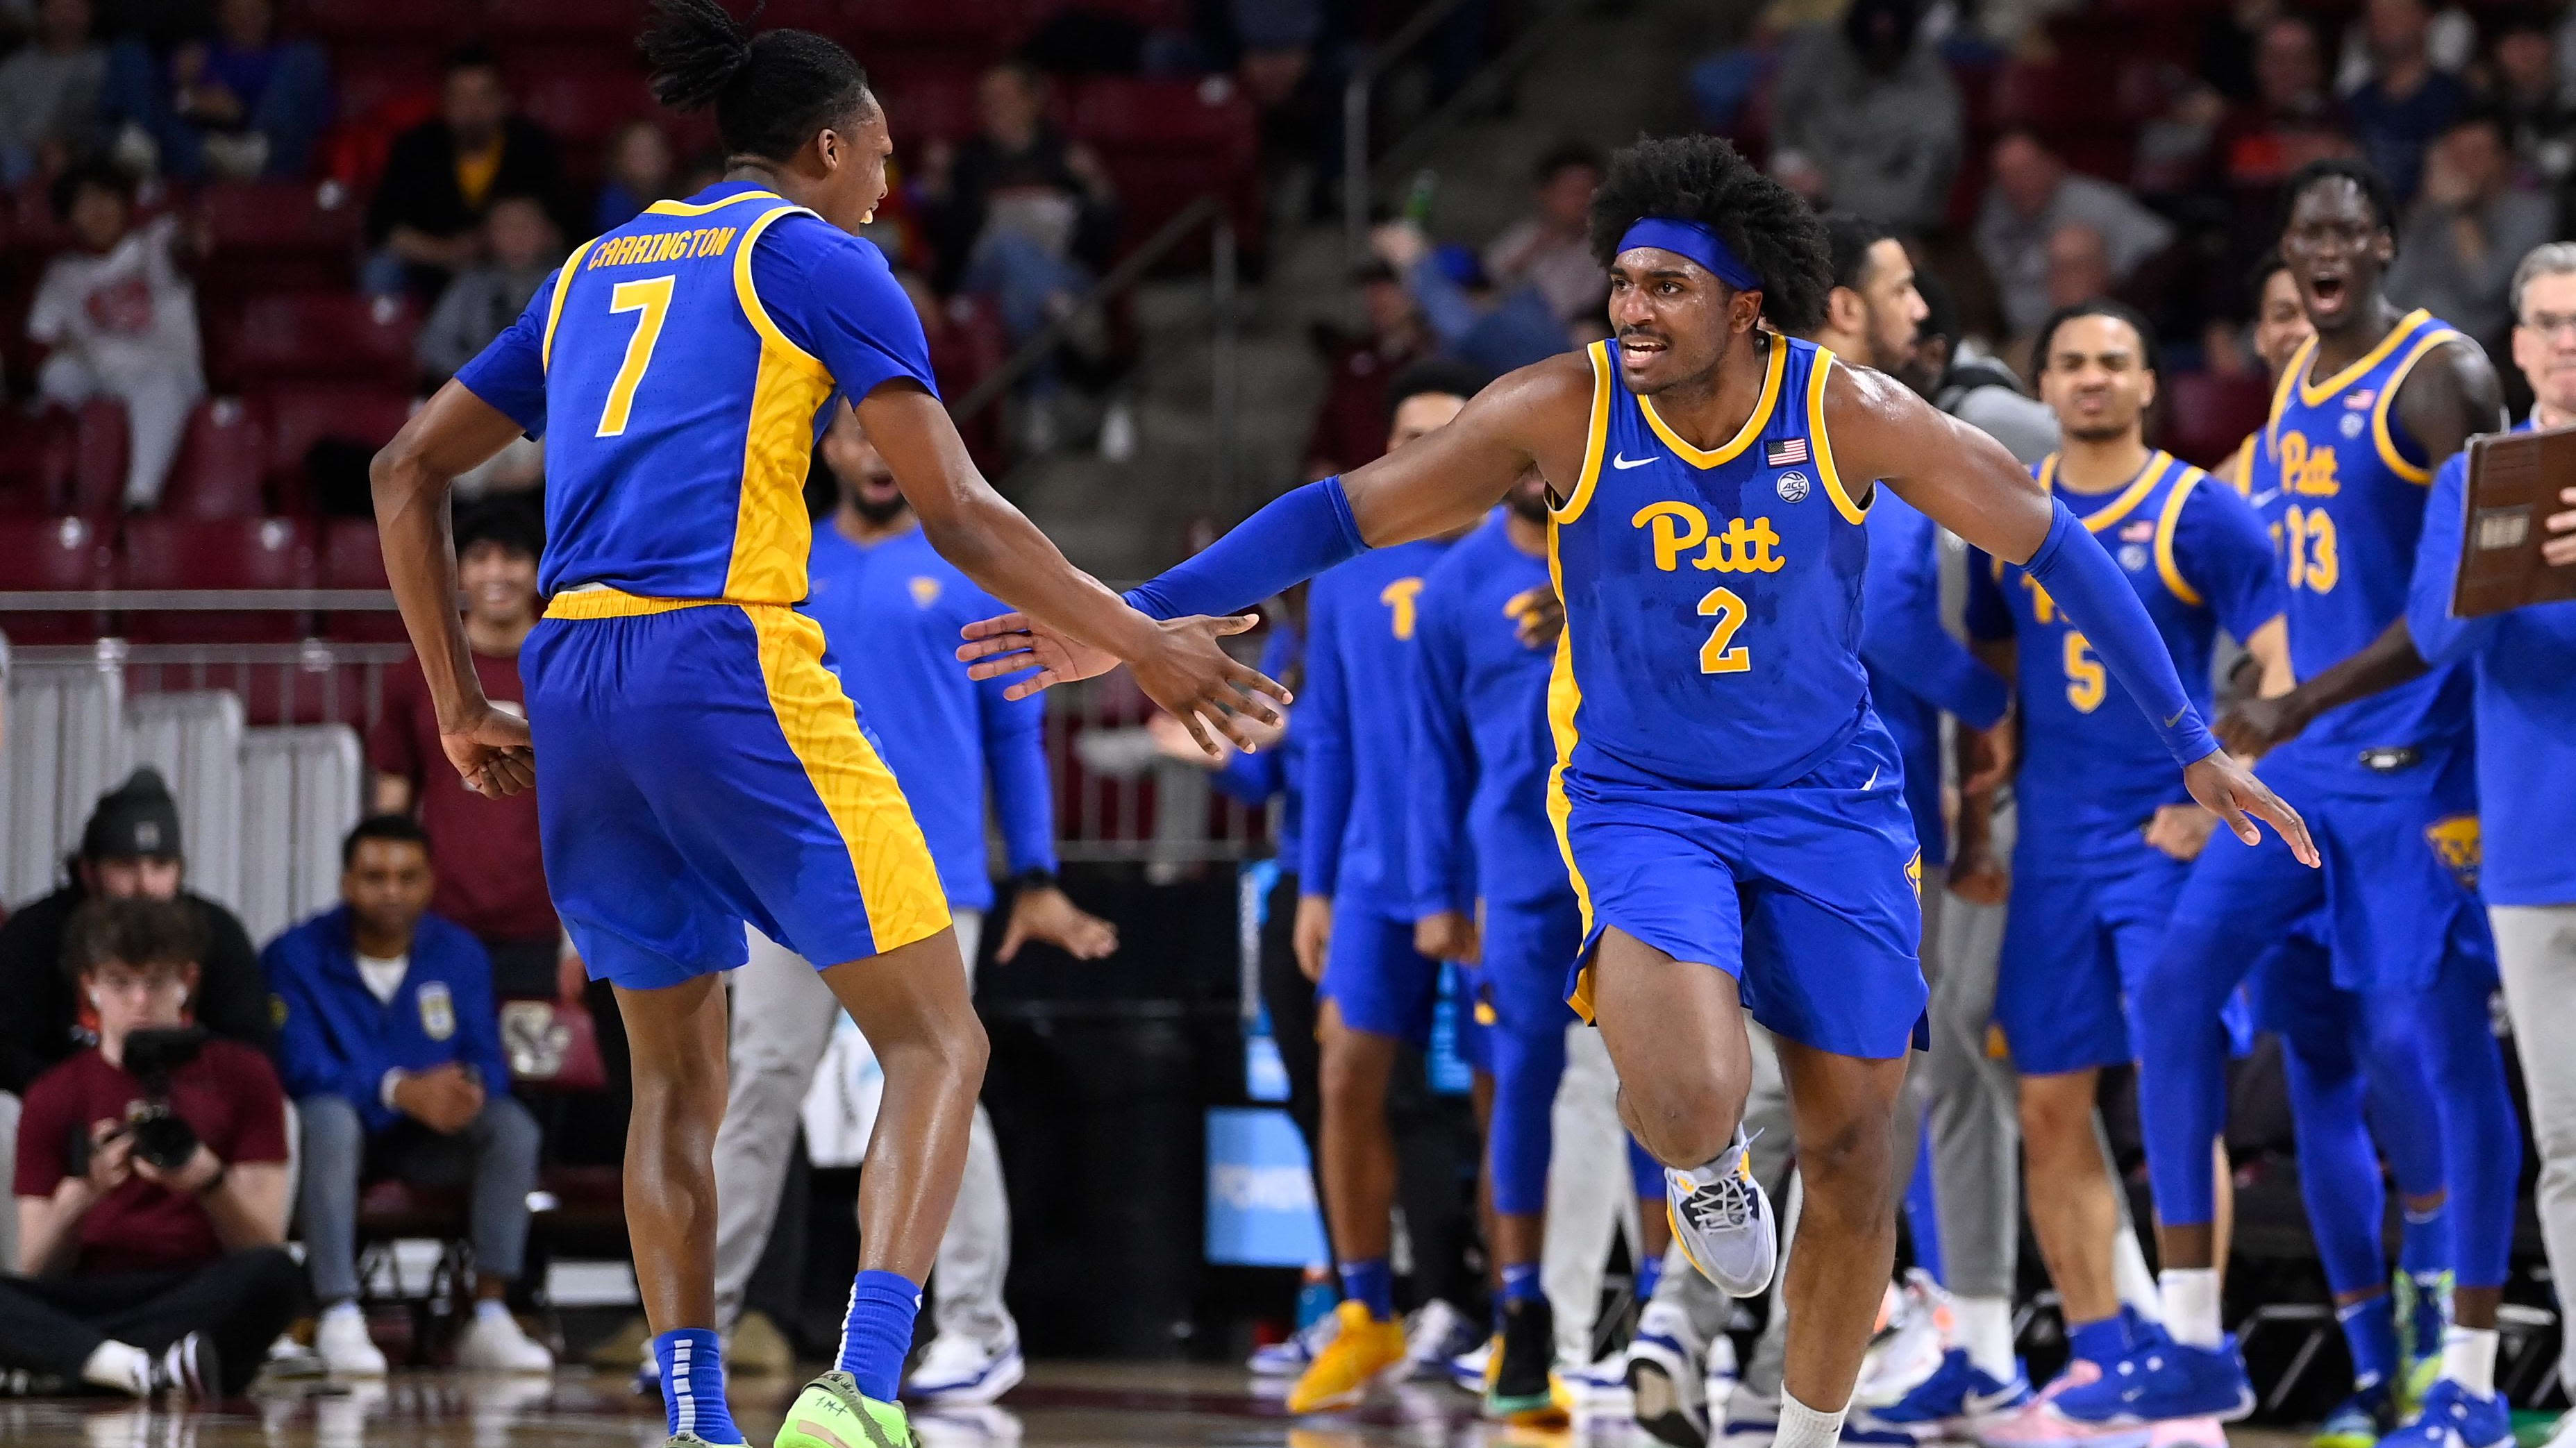 Report: Pitt Star Invited to NBA Scouting Event